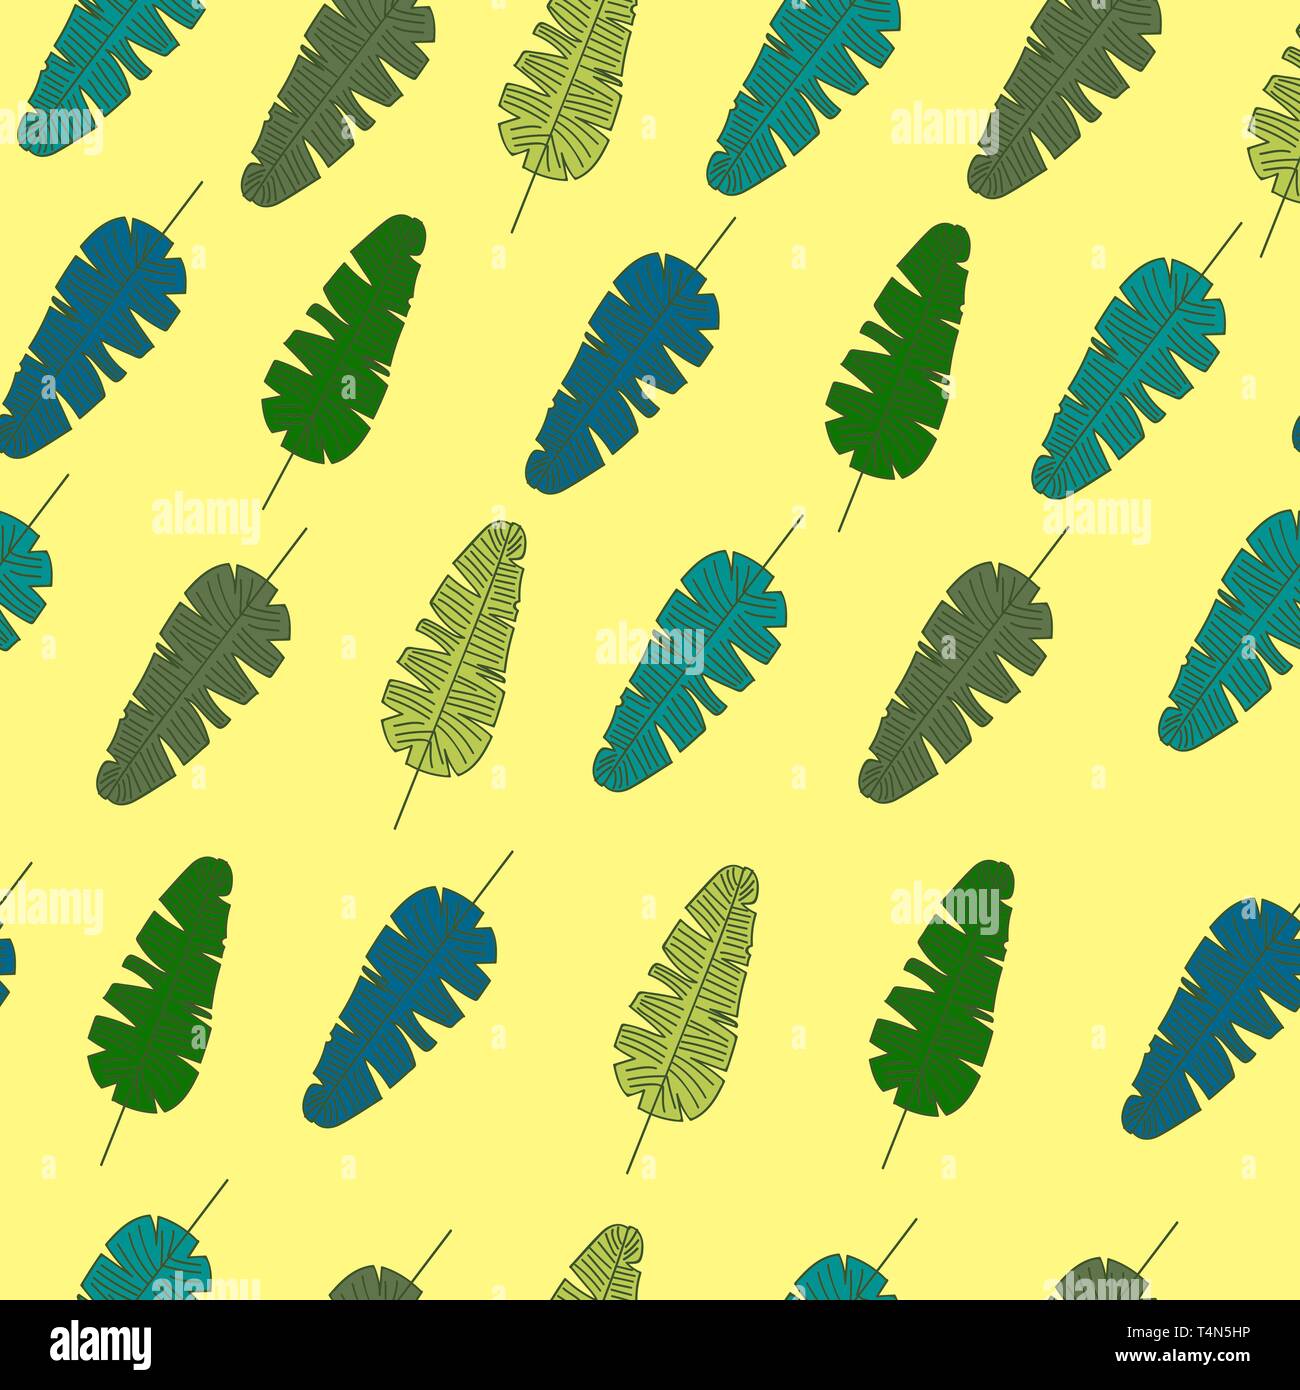 Seamless pattern with colorful tropical leaves and plants Stock Vector